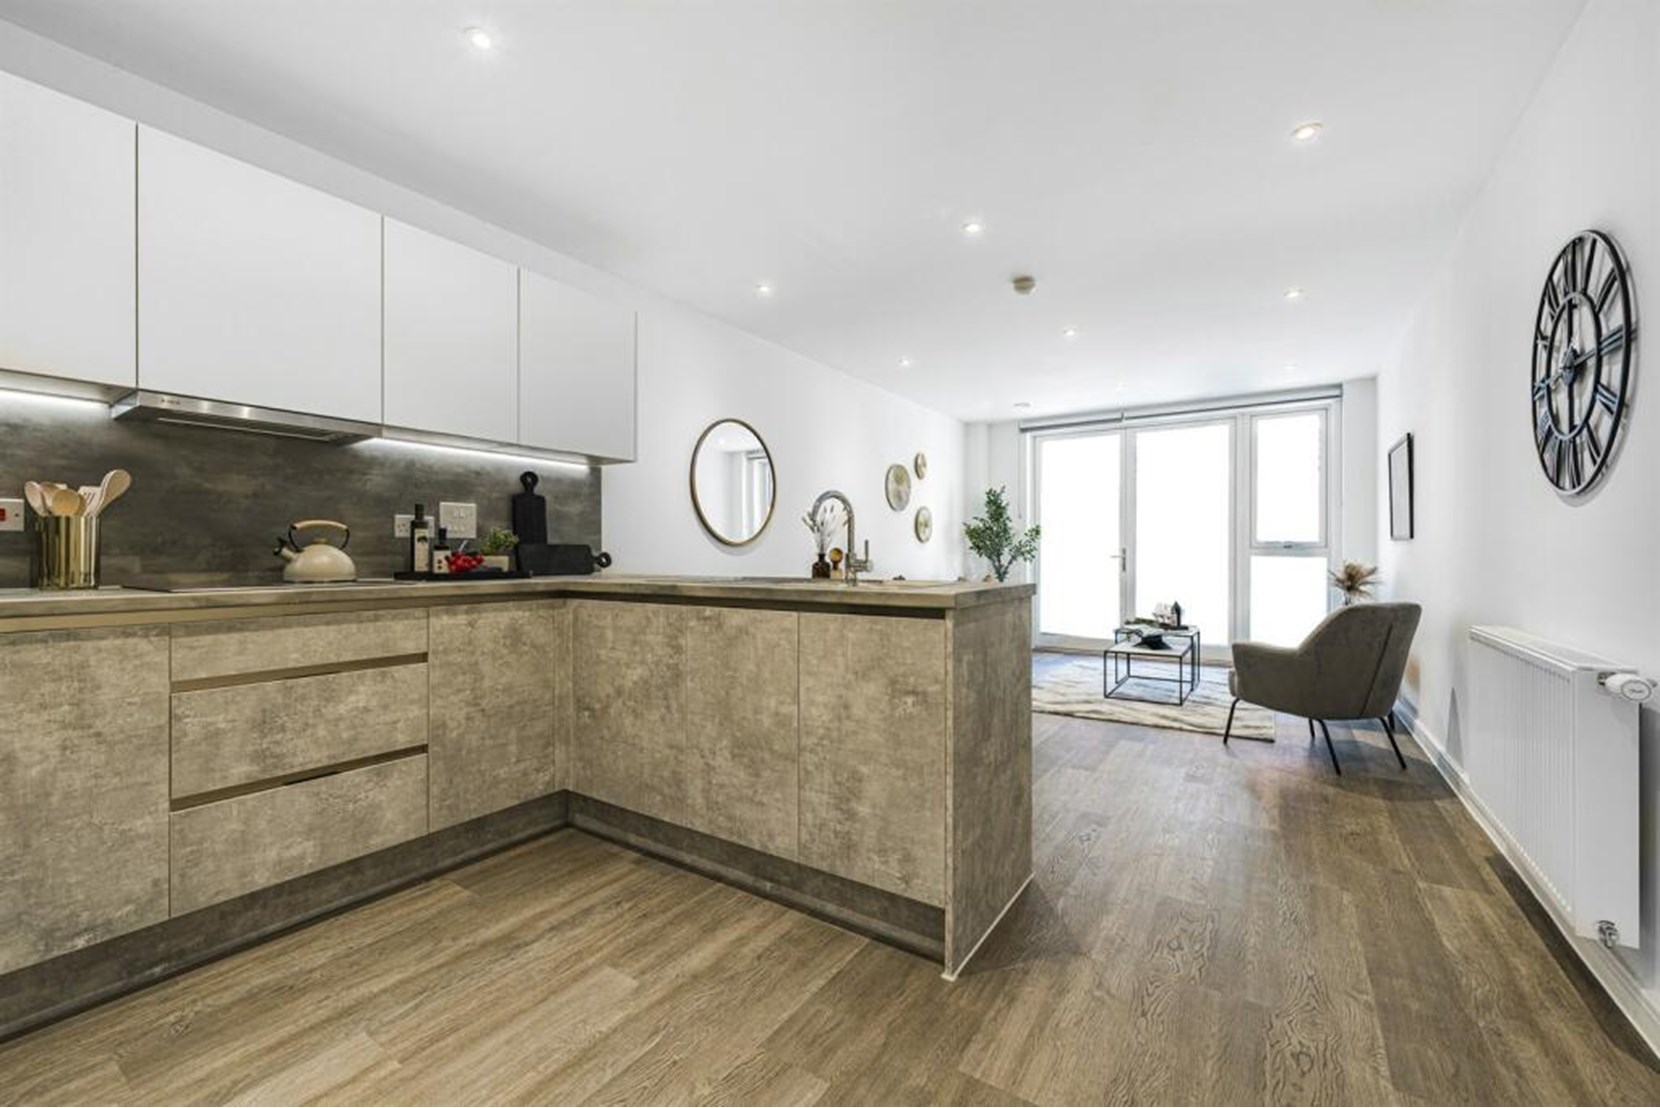 Apartments to Rent by Simple Life London in Elements, Enfield, EN3, The Copper kitchen